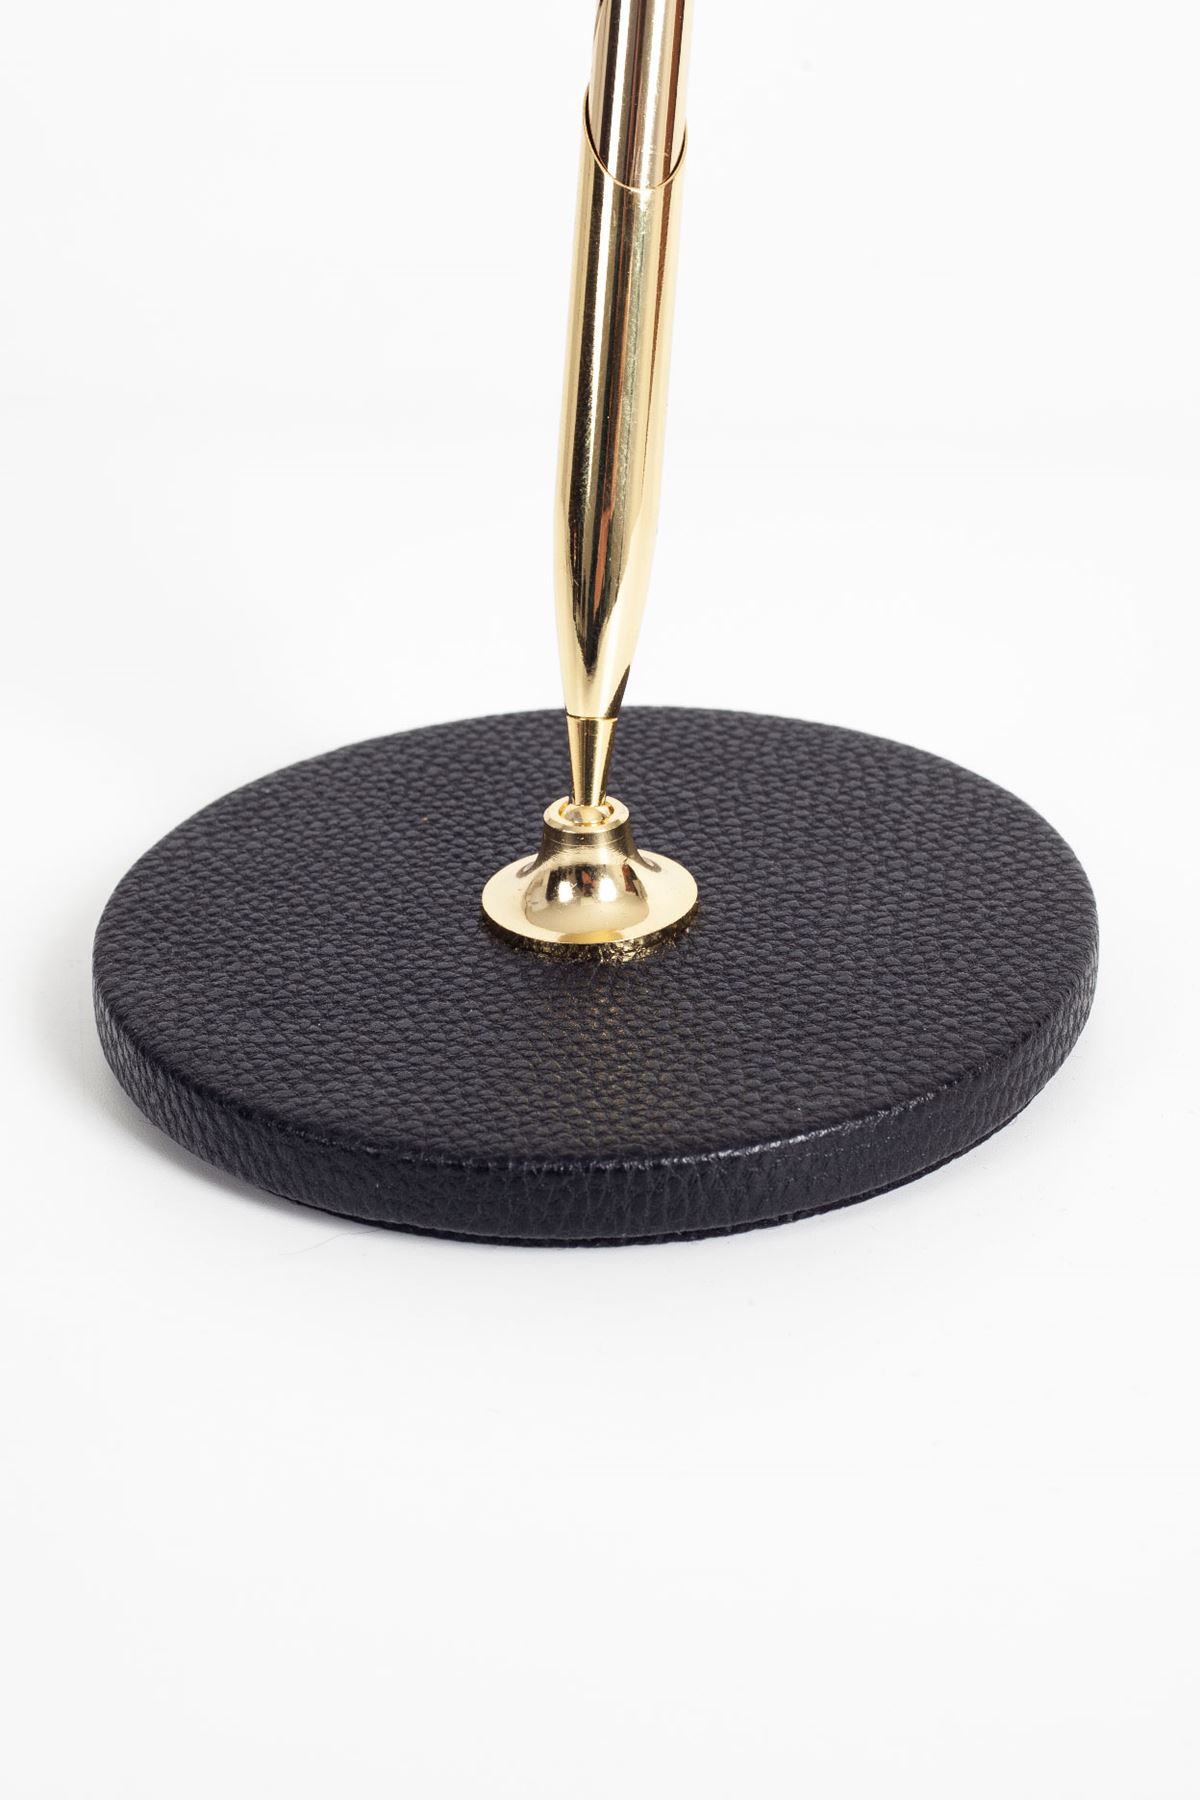 Polo Leather Pen Stand Gold